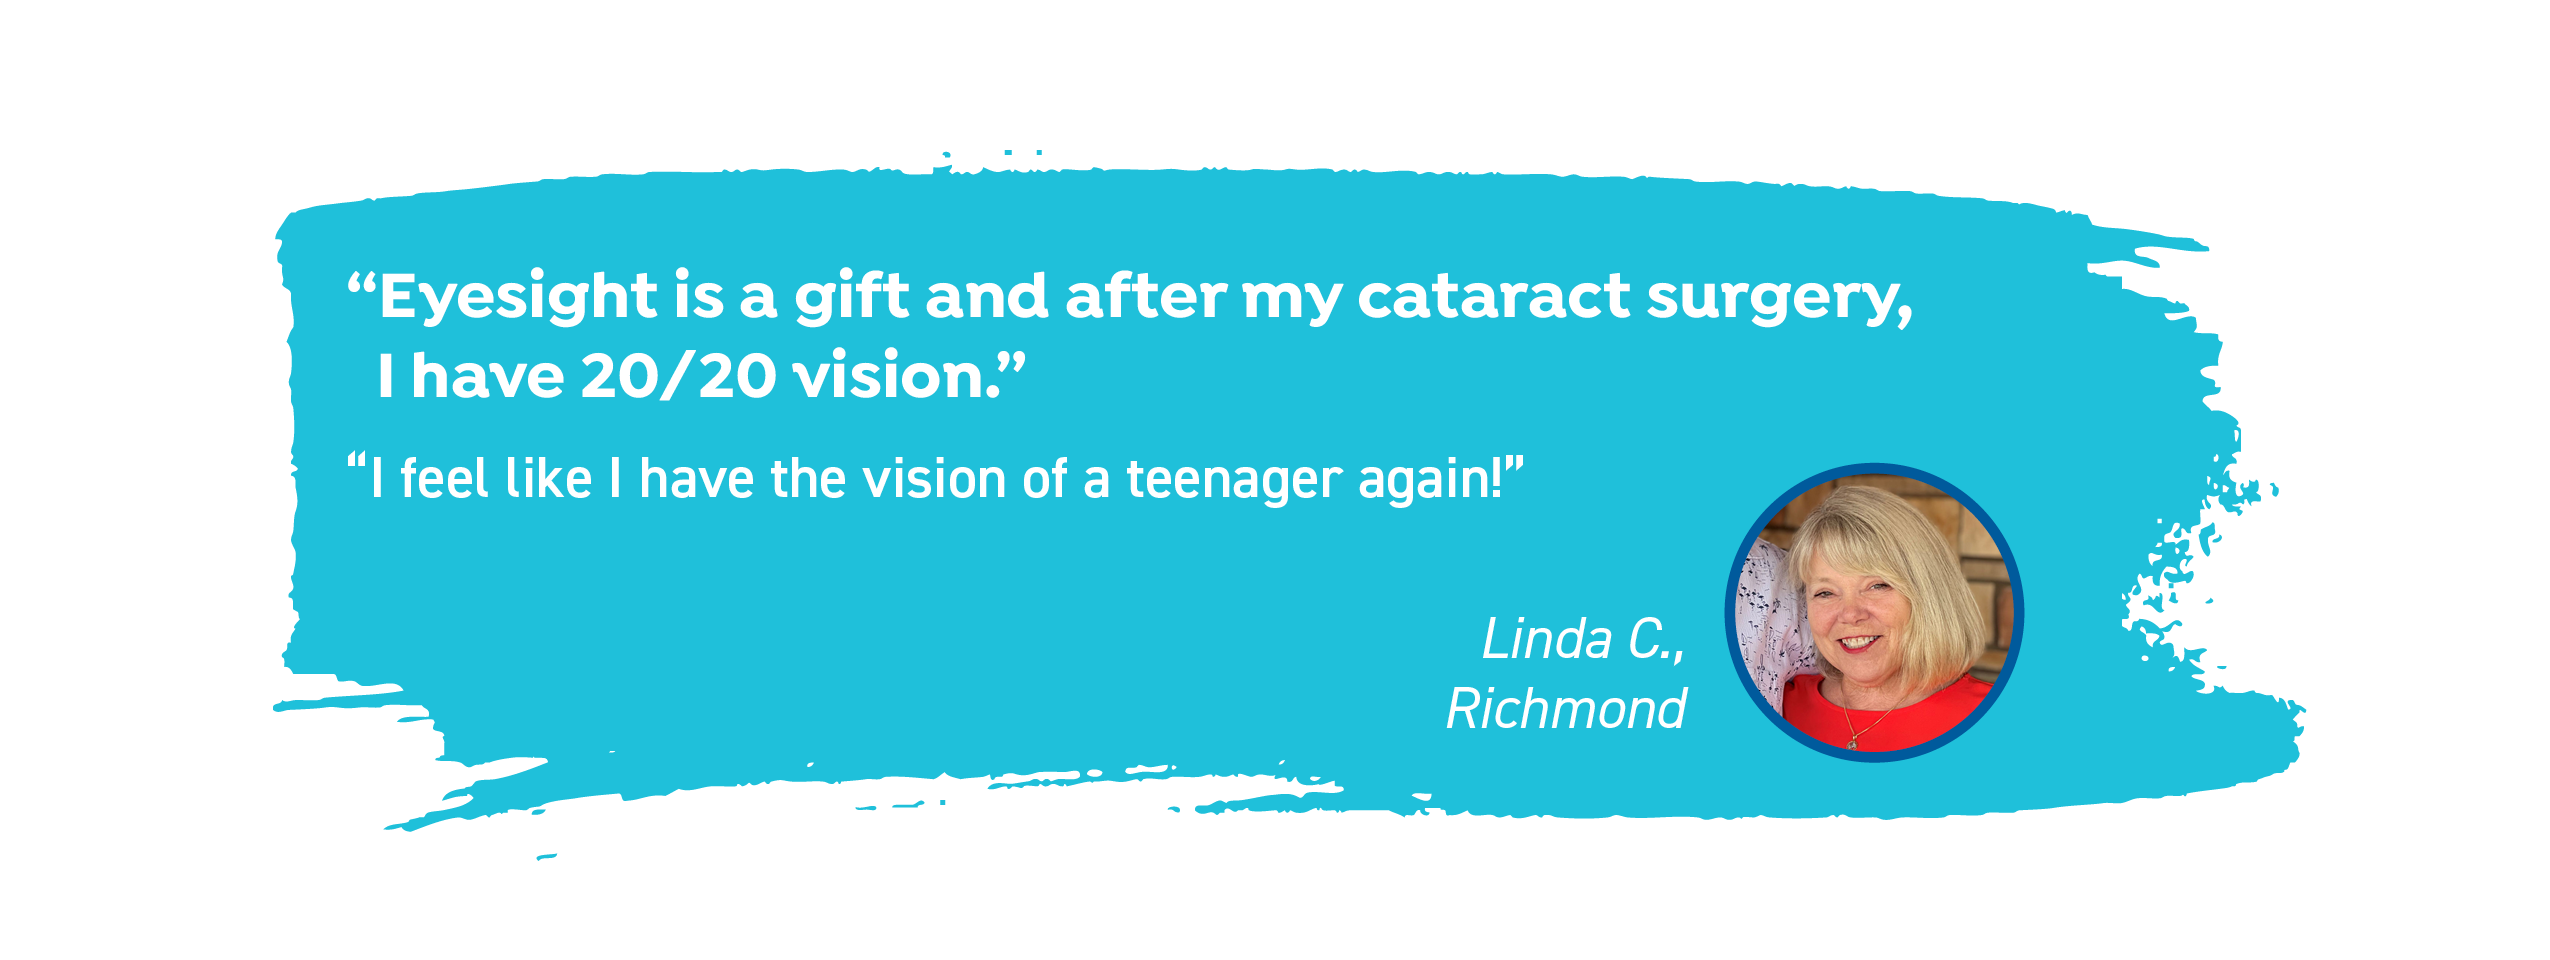 Linda C. of Richmond says, "Eyesight is a gift and after my cataract surgery, I have 20/20 vision. I feel like I have the vision of a teenager again!"